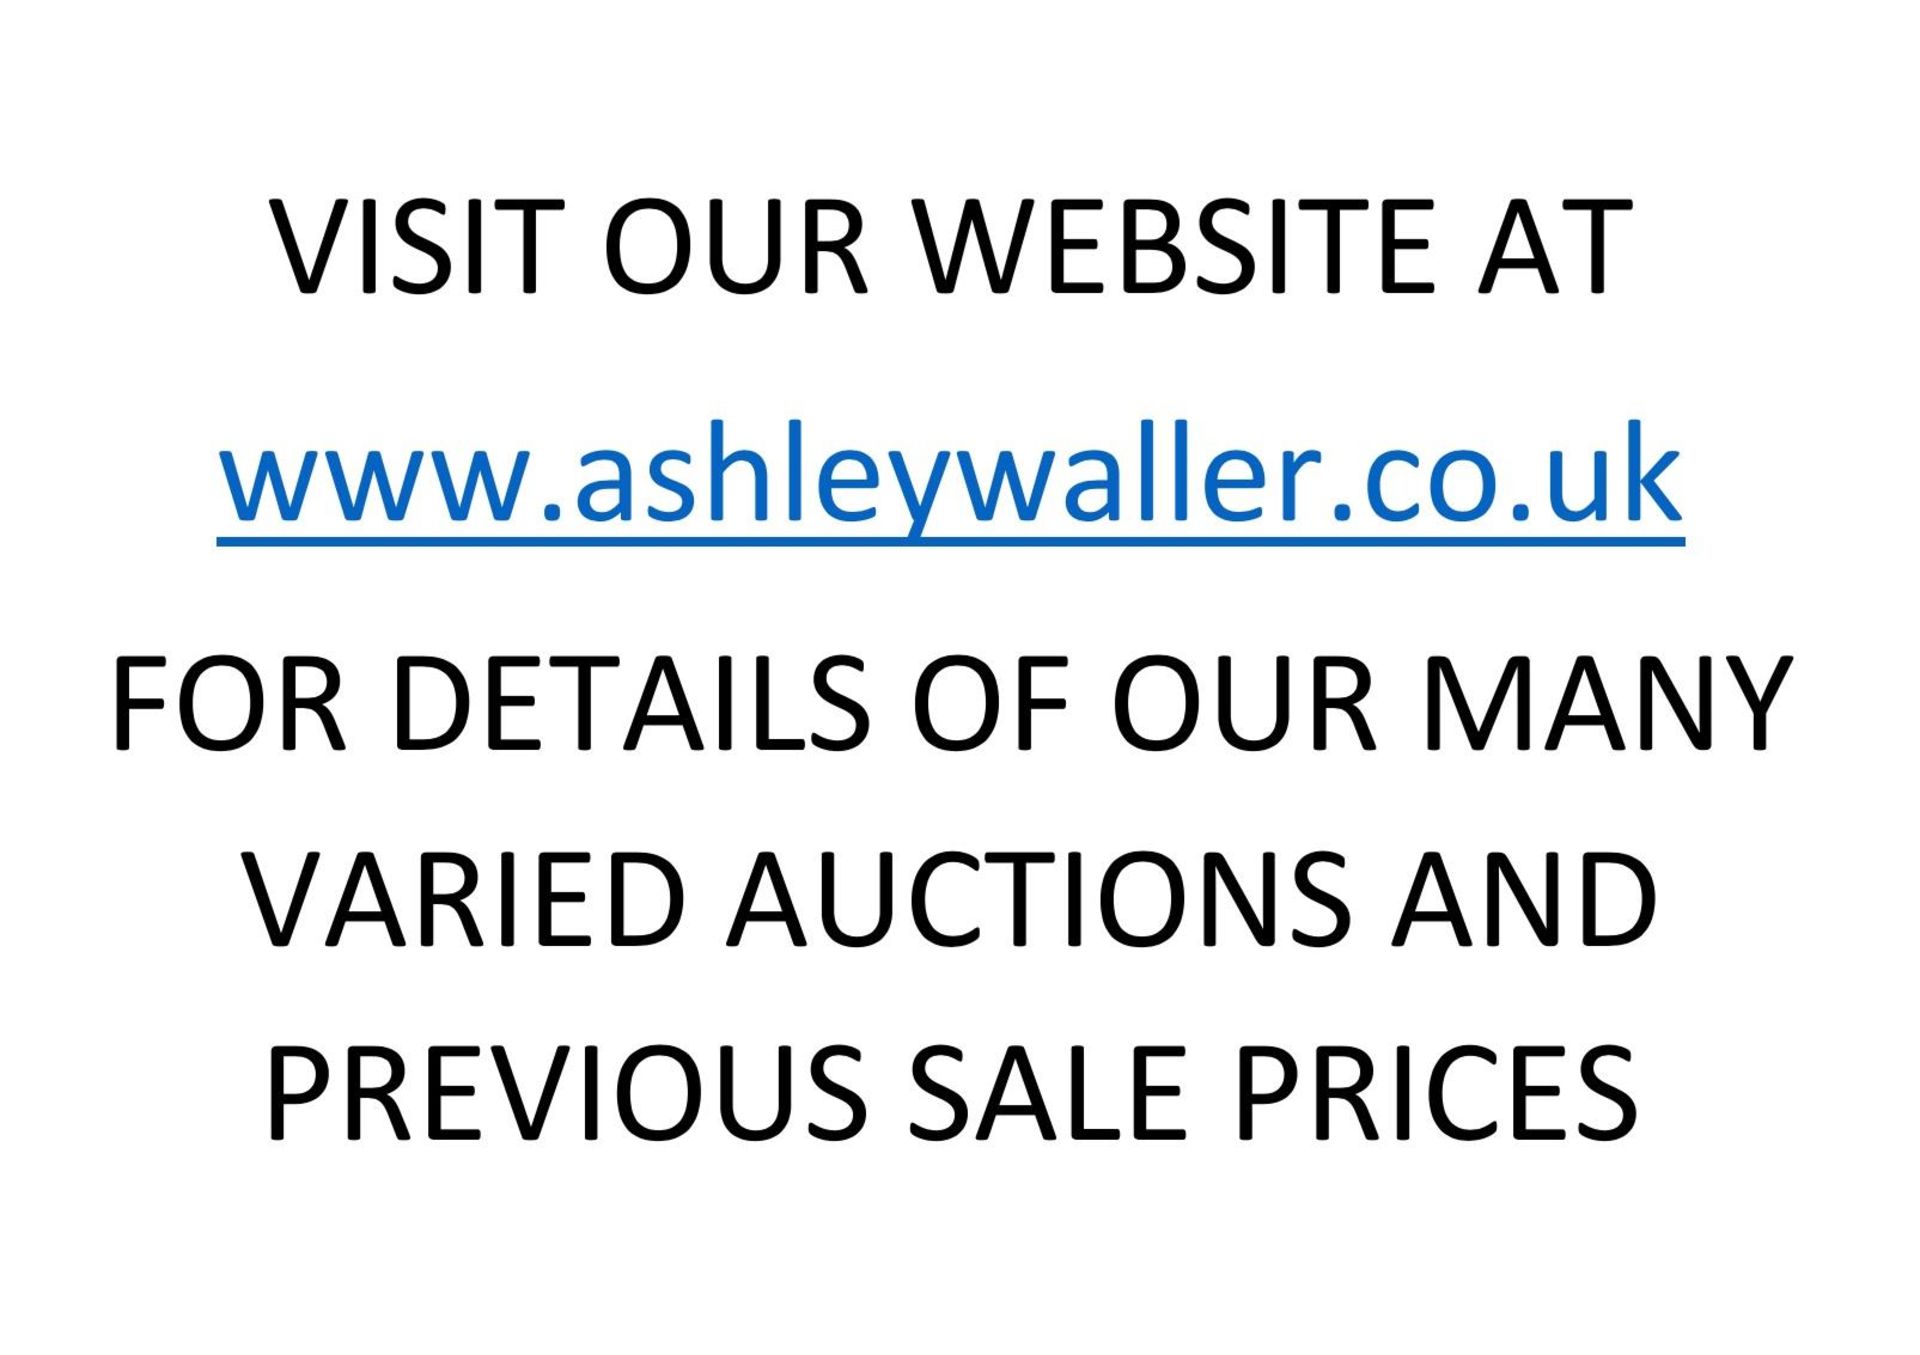 END OF SALE, THANK YOU FOR YOUR BIDDING. OUR NEXT SALE IS ON THE 5TH & 6TH JULY 2023